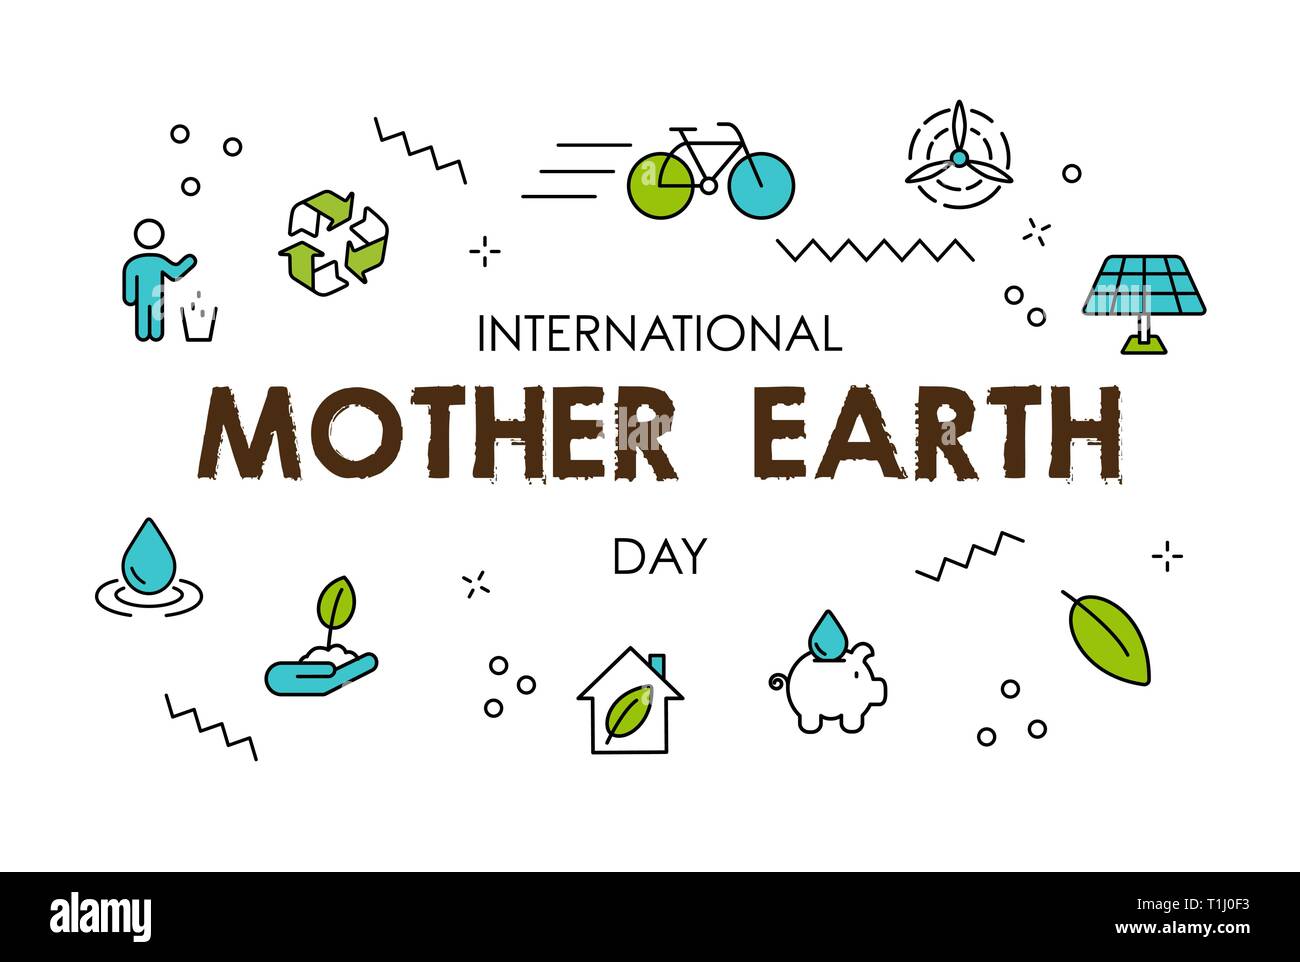 International Earth Day illustration. Green line icons and symbols for eco friendly activities, social environment awareness concept. Stock Vector